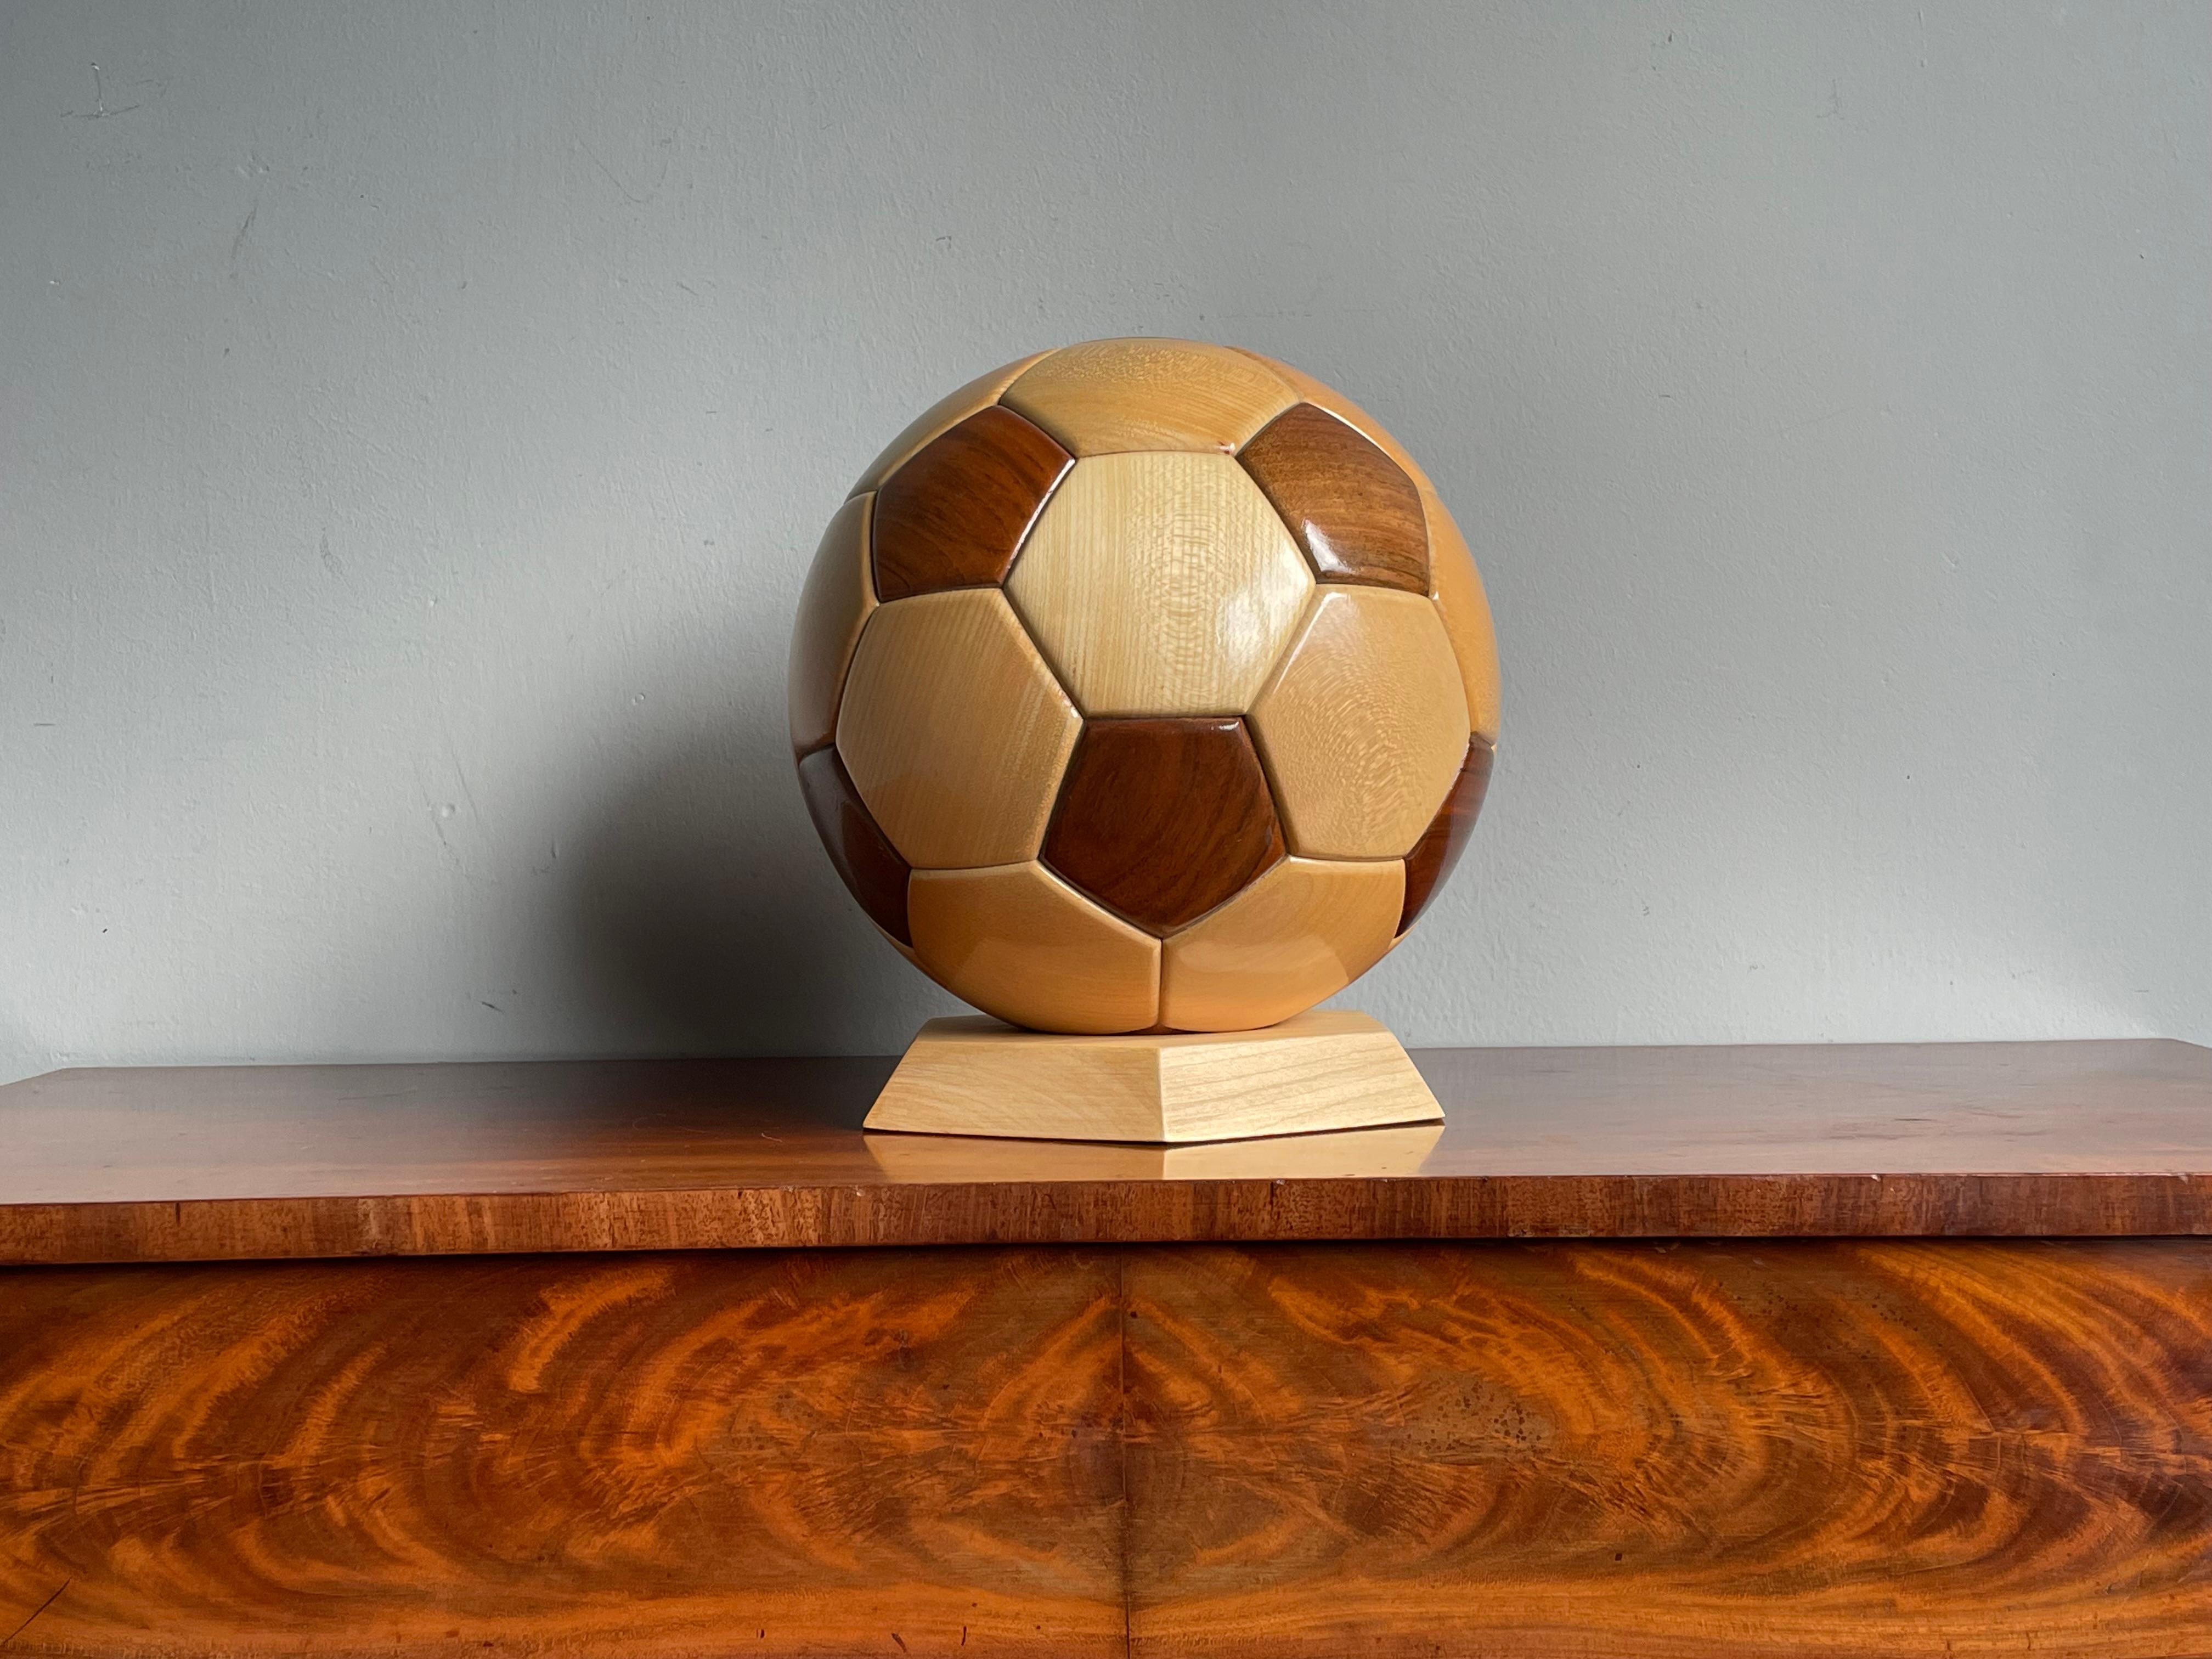 Handcrafted and perfectly realistic wooden soccer ball on hexagonal base.

This rare and beautifully made soccer ball is in near-mint condition and it is made in almost the same size as the ones with which they play in pro soccer. This stunning ball